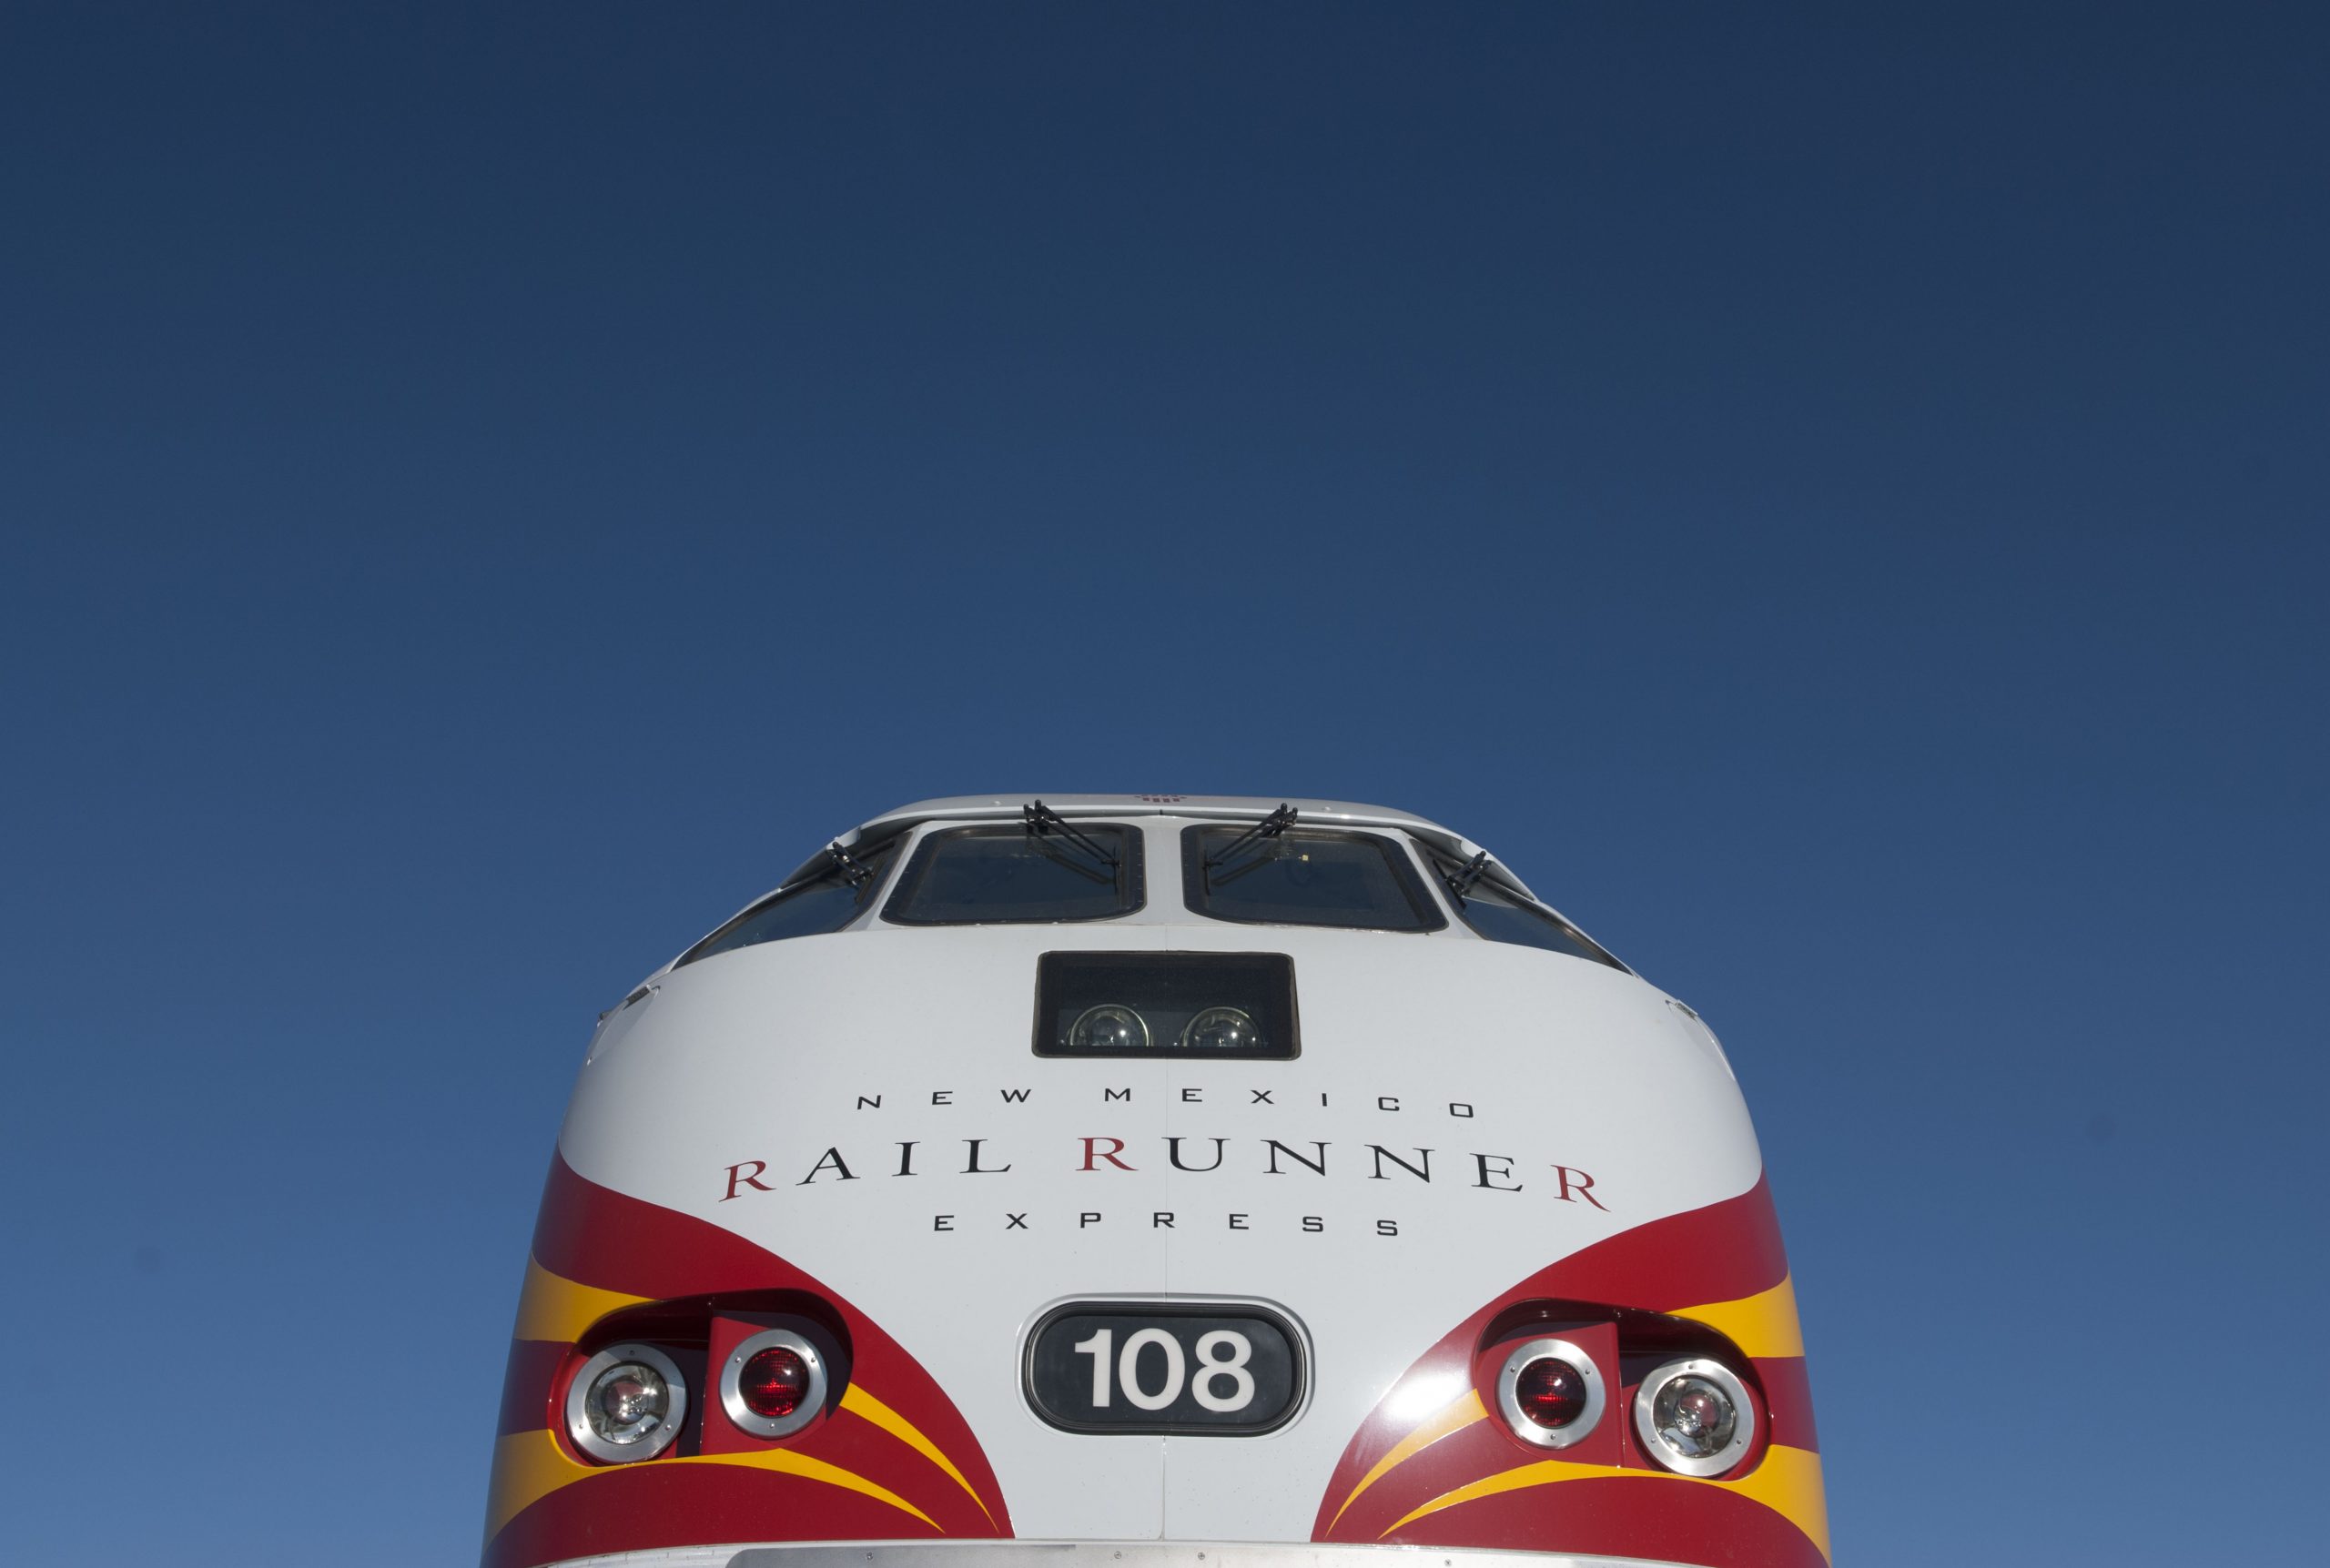 A picture of the rail runner